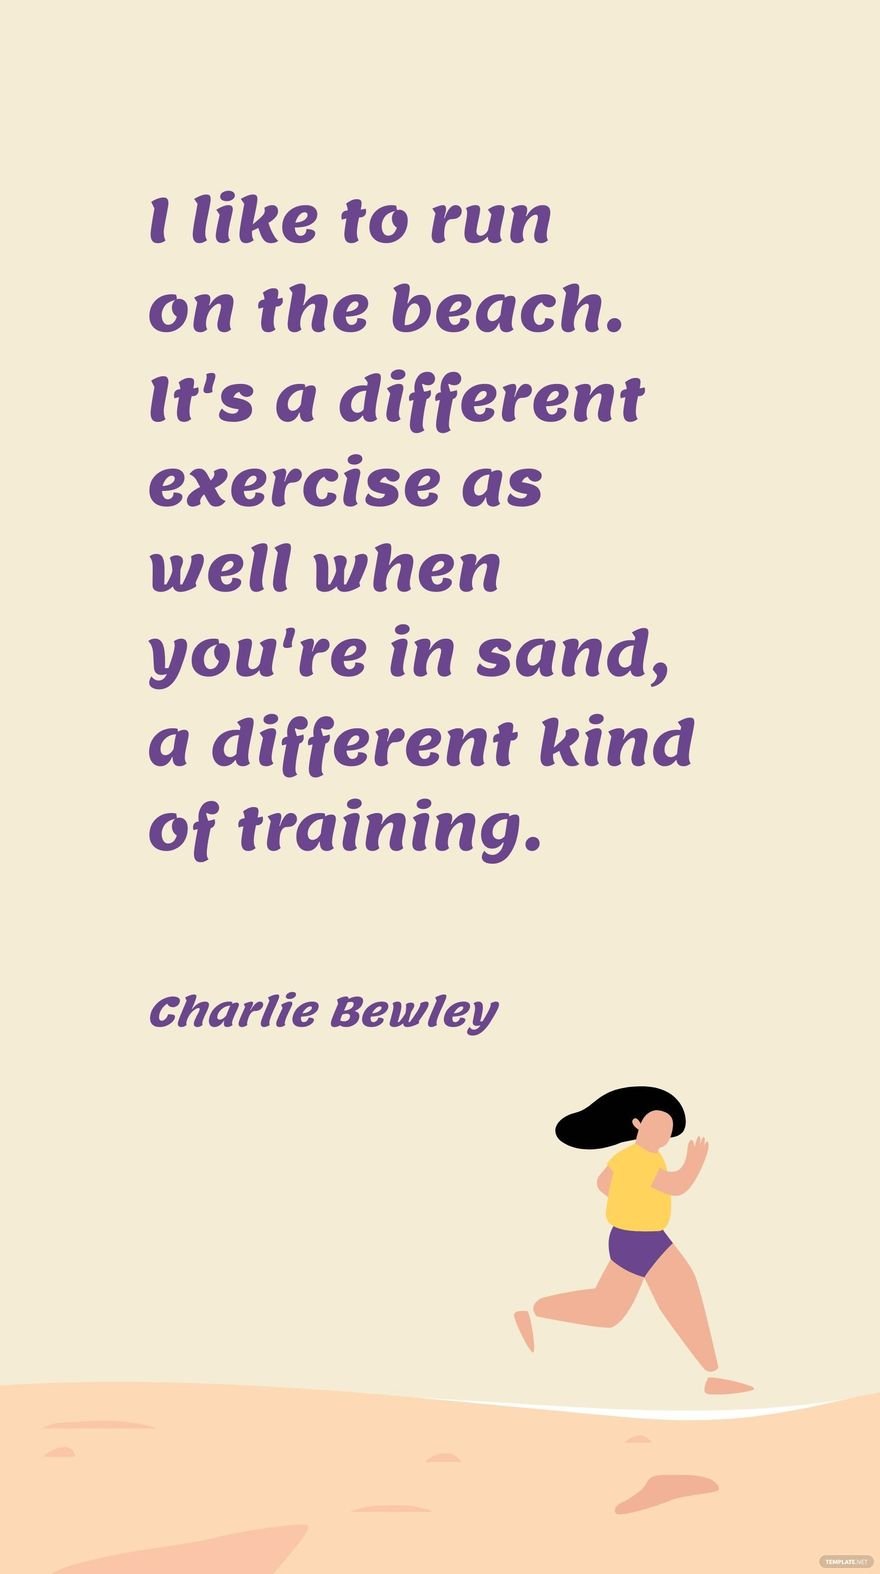 Free Charlie Bewley - I like to run on the beach. It's a different exercise as well when you're in sand, a different kind of training. in JPG